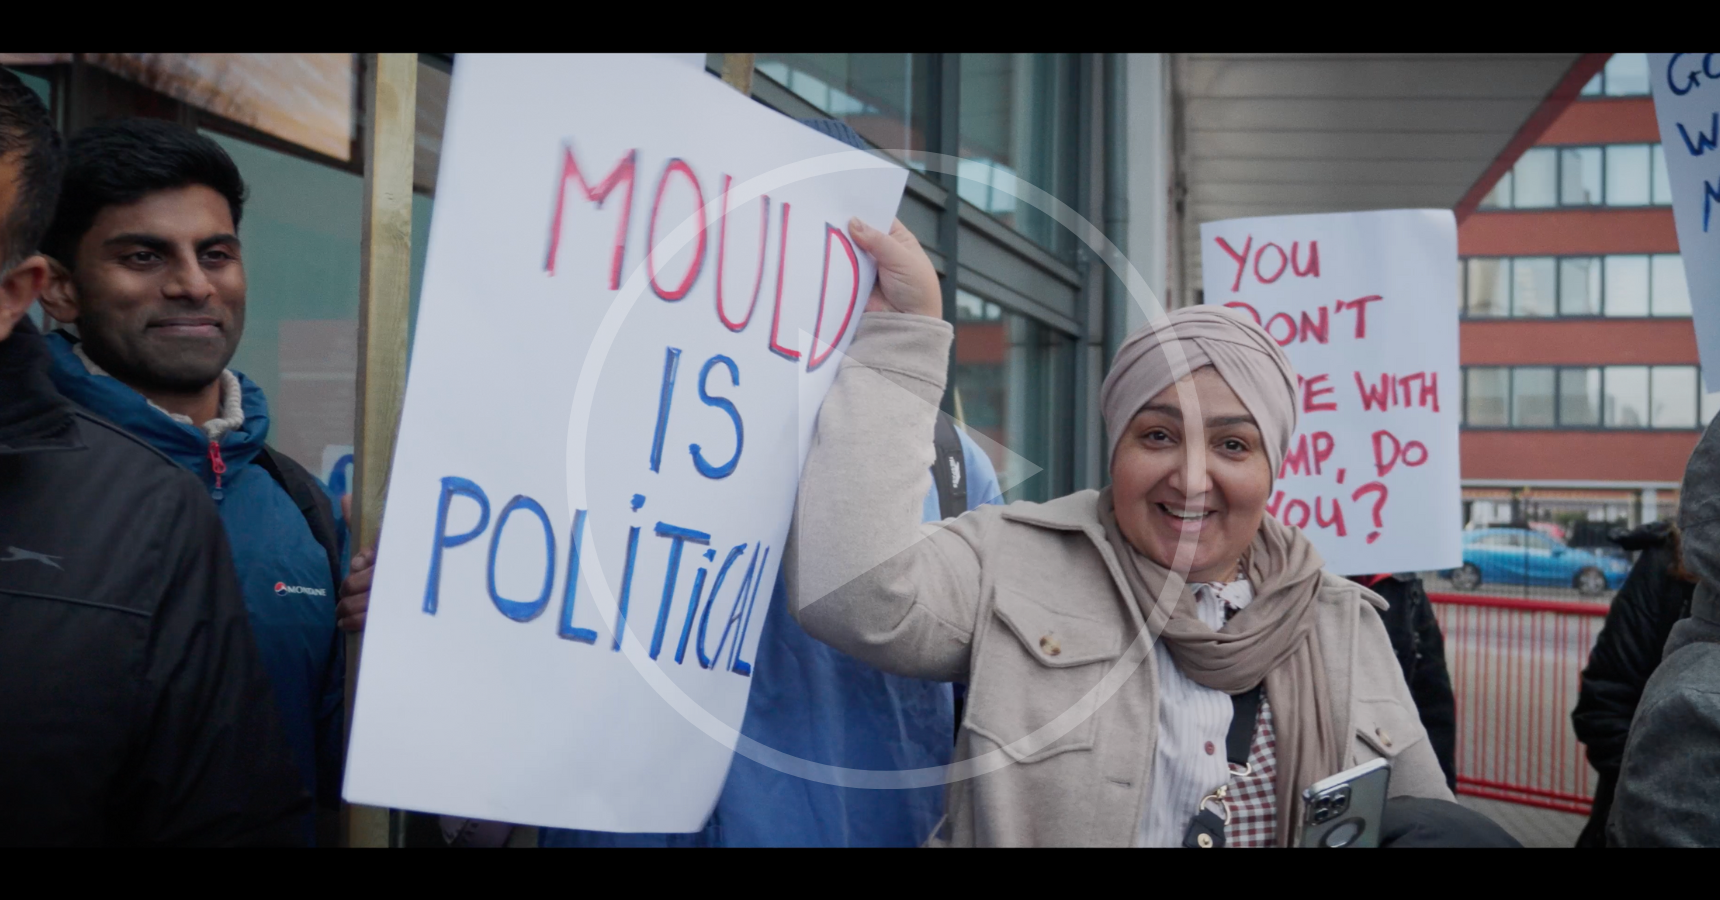 A Brown woman with a headscarf smiles a the camera holding up a paper placard that reads "Mould is Political" – to the right is a Brown man with short black hair wearing medical scrubs, also smiling.